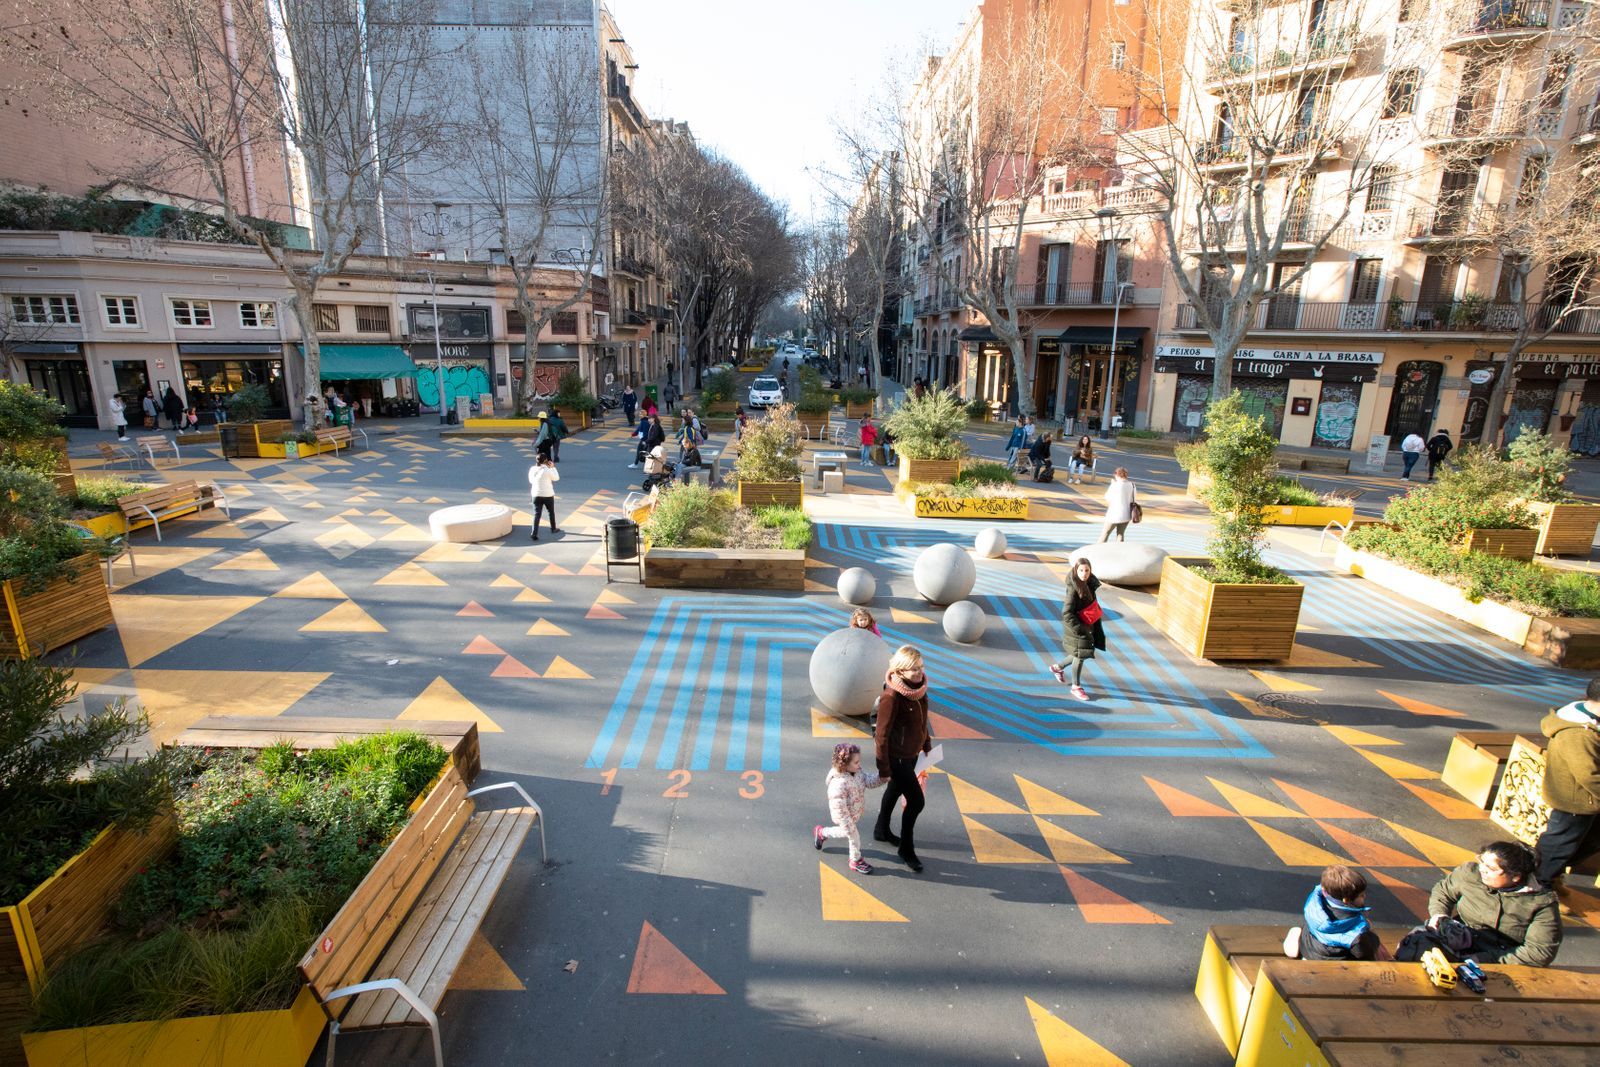 Photograph of people using the pedestrian only open space provided through the superblock model. Kids are roller-blading, there are chess tables and people sitting enjoying the sun.